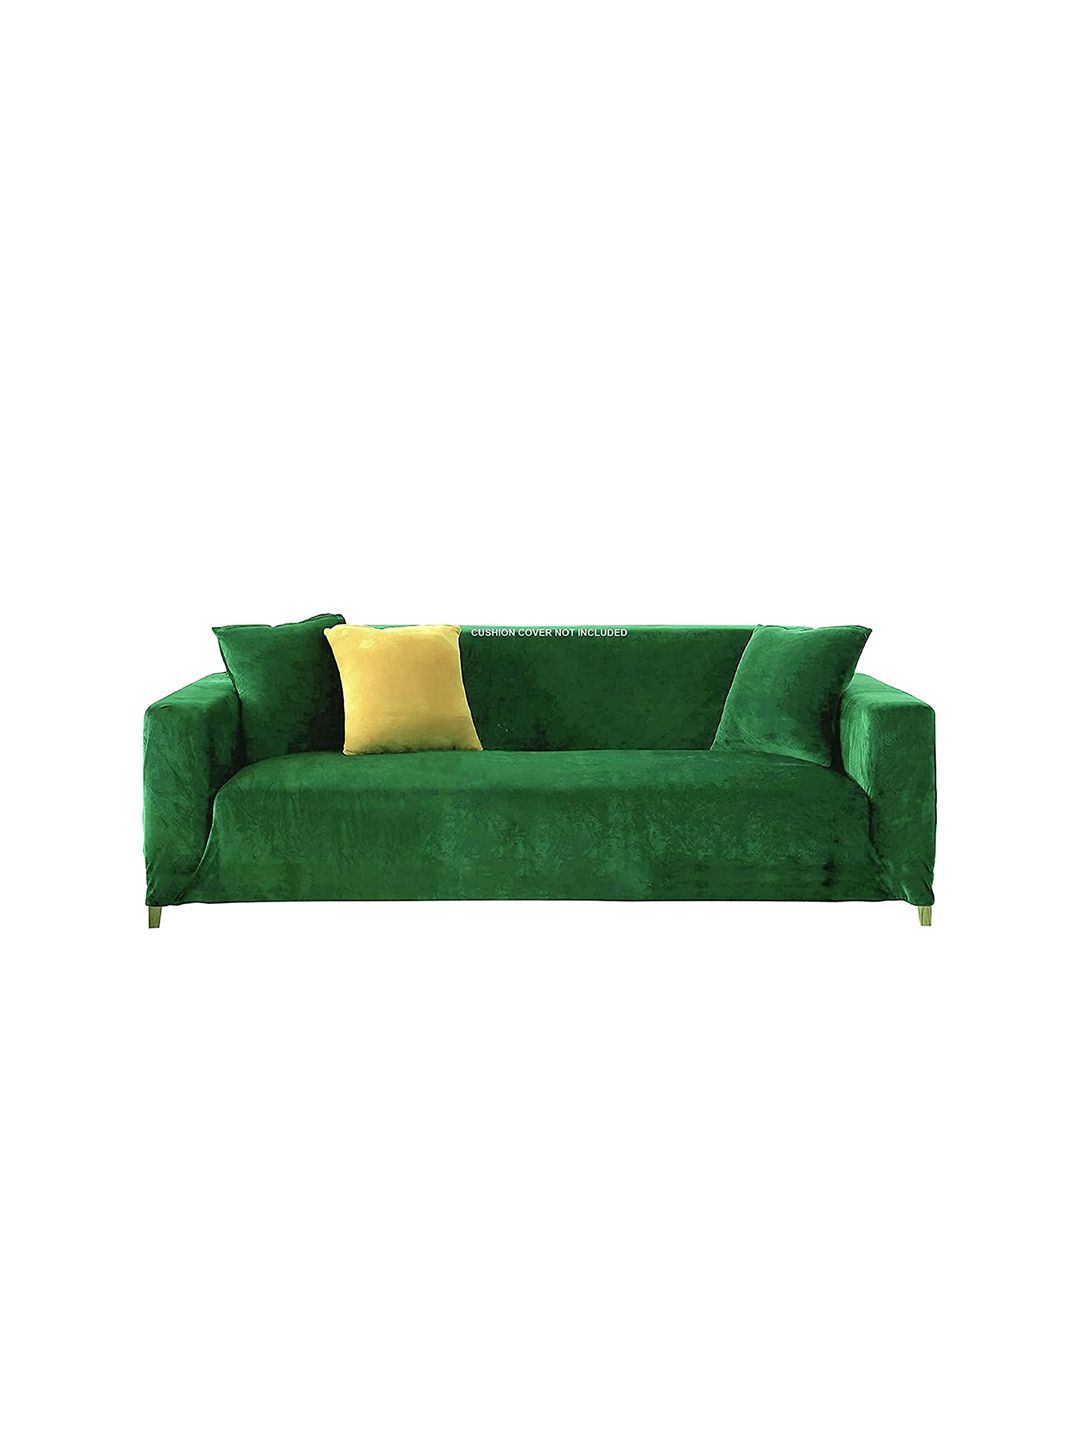 HOUSE OF QUIRK Green Solid Single-Seater Sofa Covers Price in India